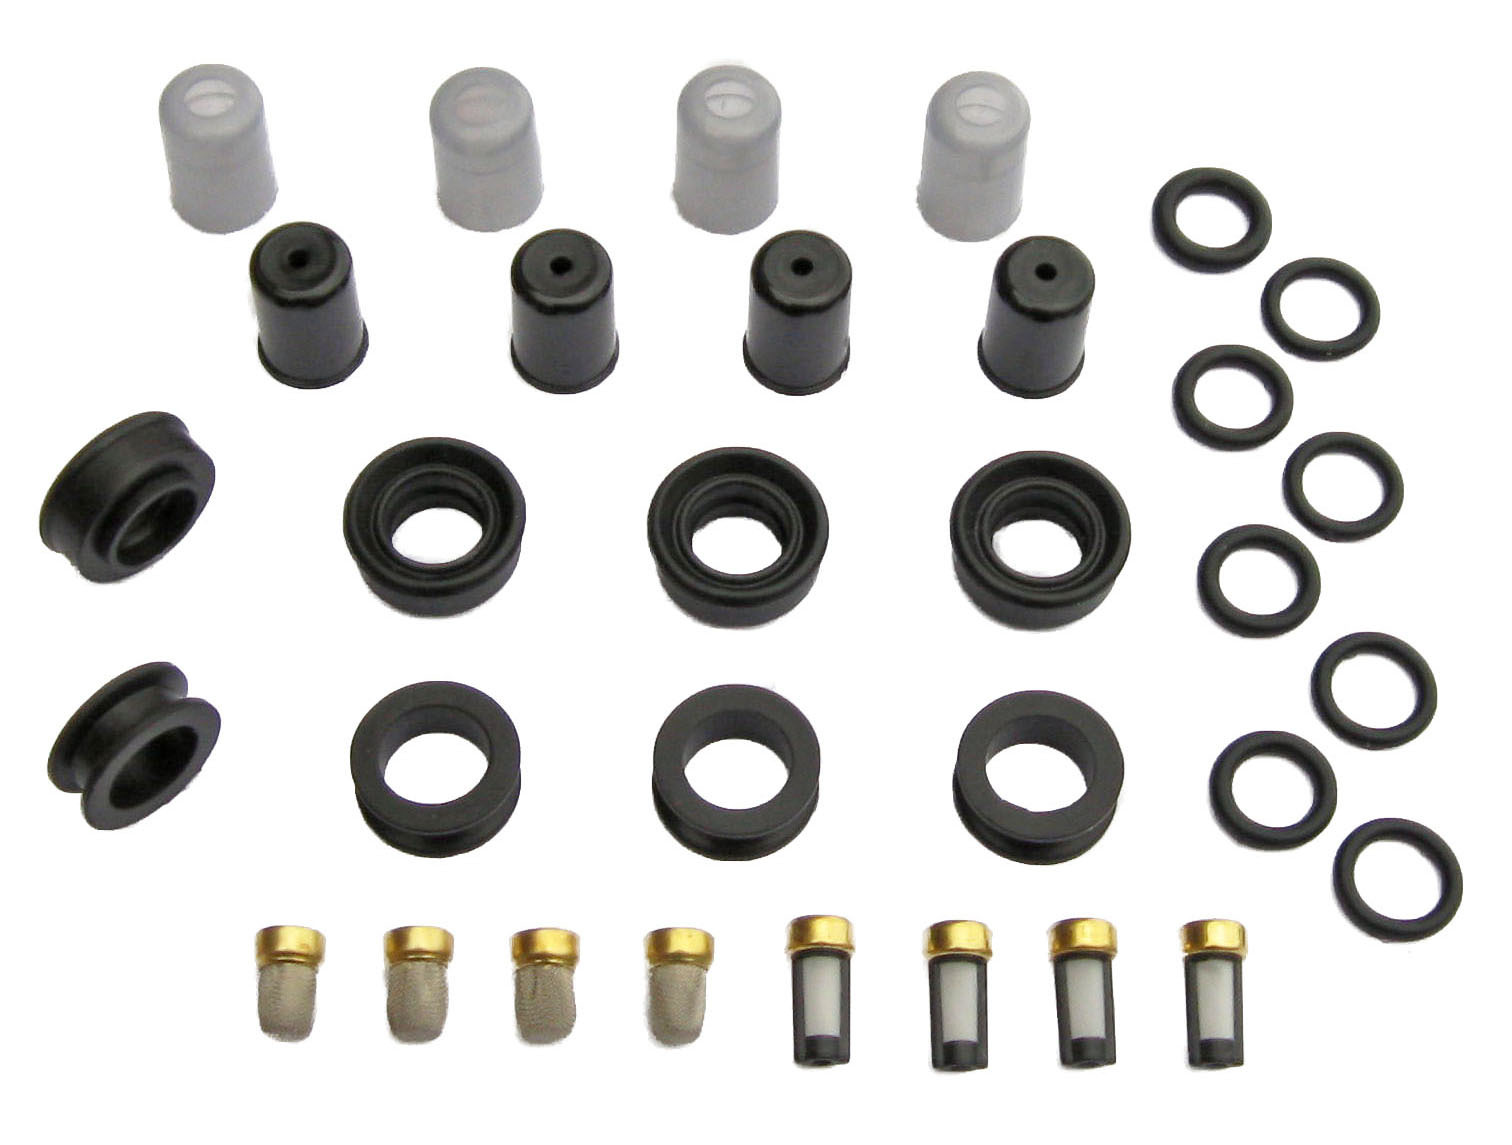 Fuel Injector O-ring Seal Filter /& Pintle Cap Kit Fits Toyota Tacoma 22RE